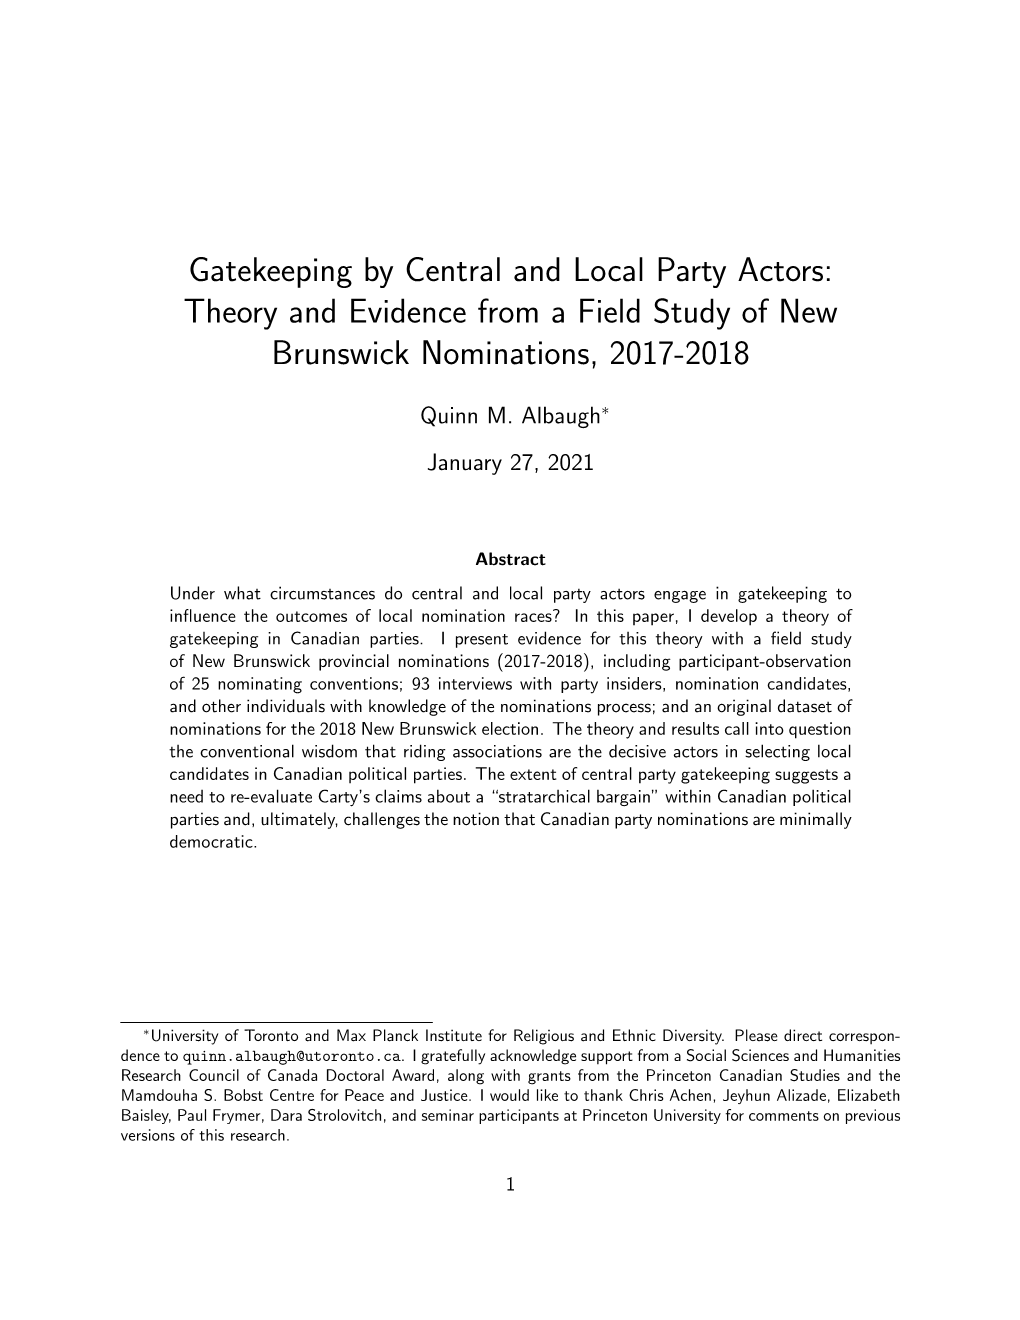 Gatekeeping by Central and Local Party Actors: Theory and Evidence from a Field Study of New Brunswick Nominations, 2017-2018